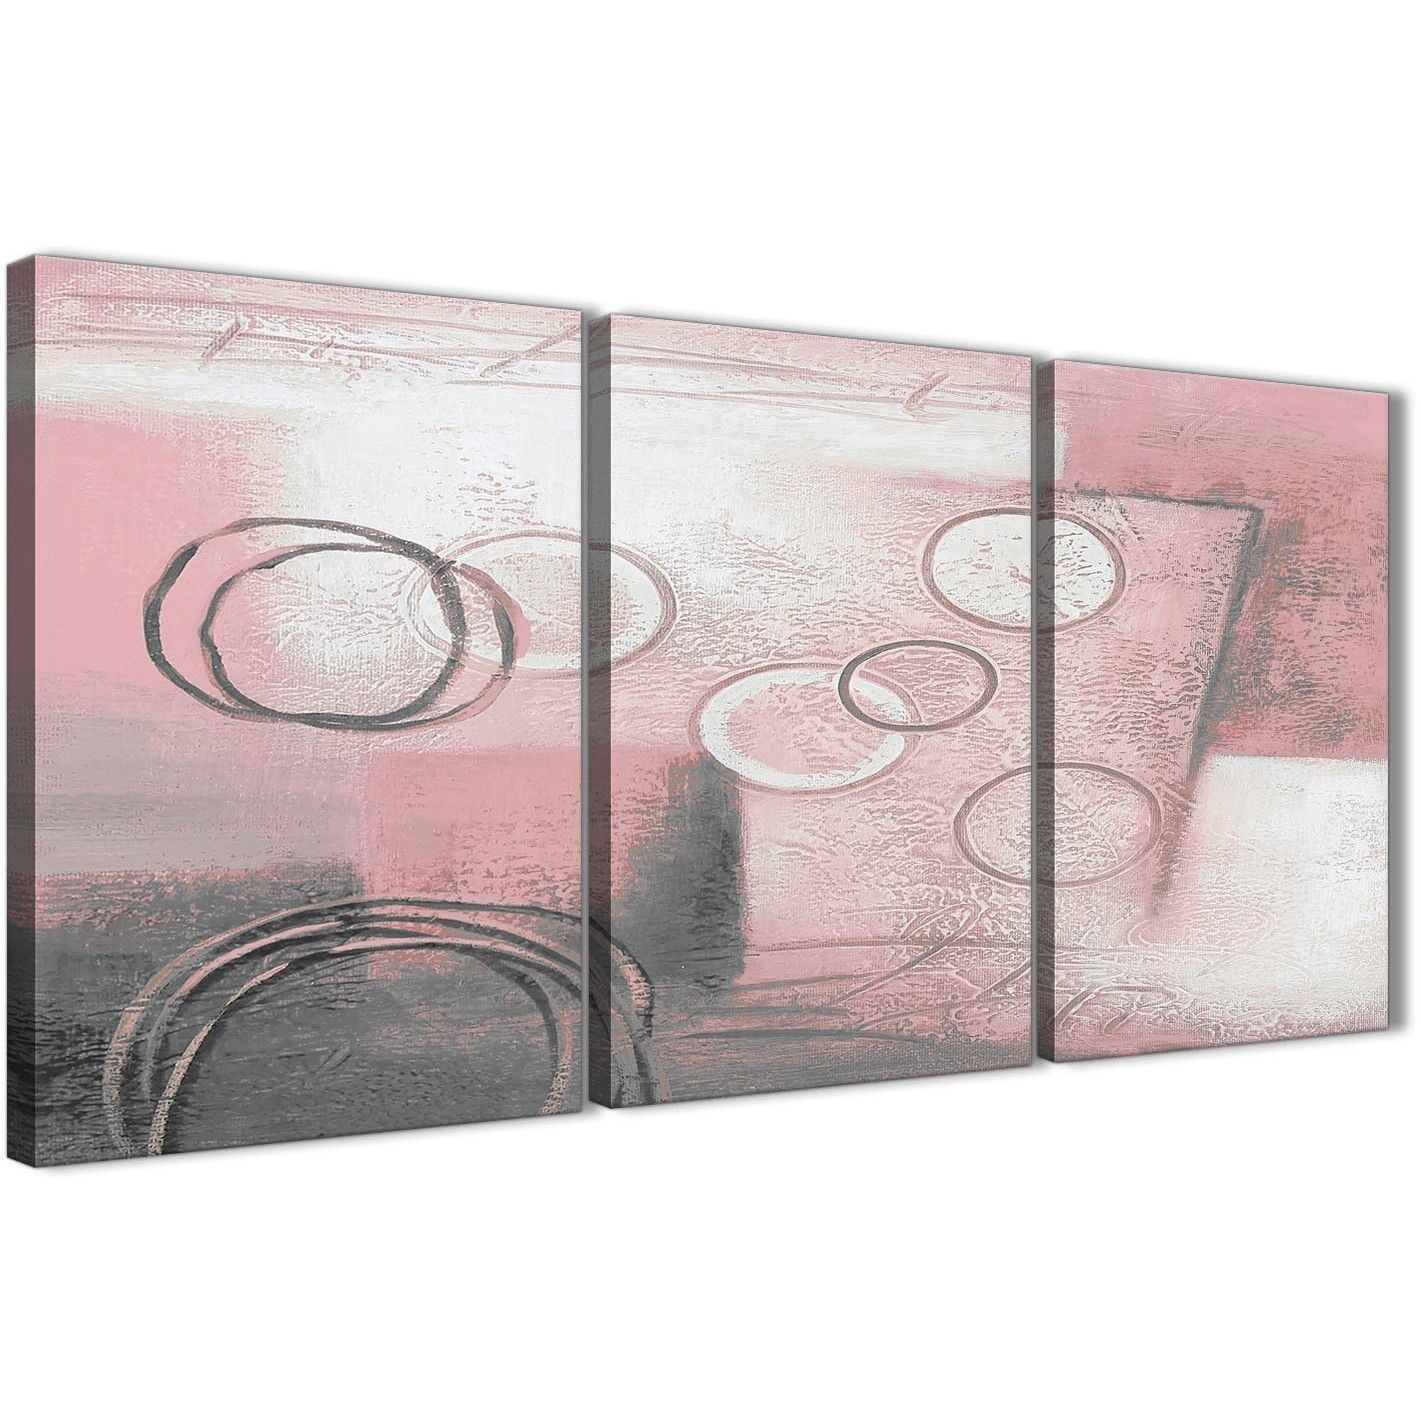 3 Piece Blush Pink Grey Painting Kitchen Canvas Wall Art Decor Within Most Recently Released Kitchen Canvas Wall Art Decors (View 13 of 20)